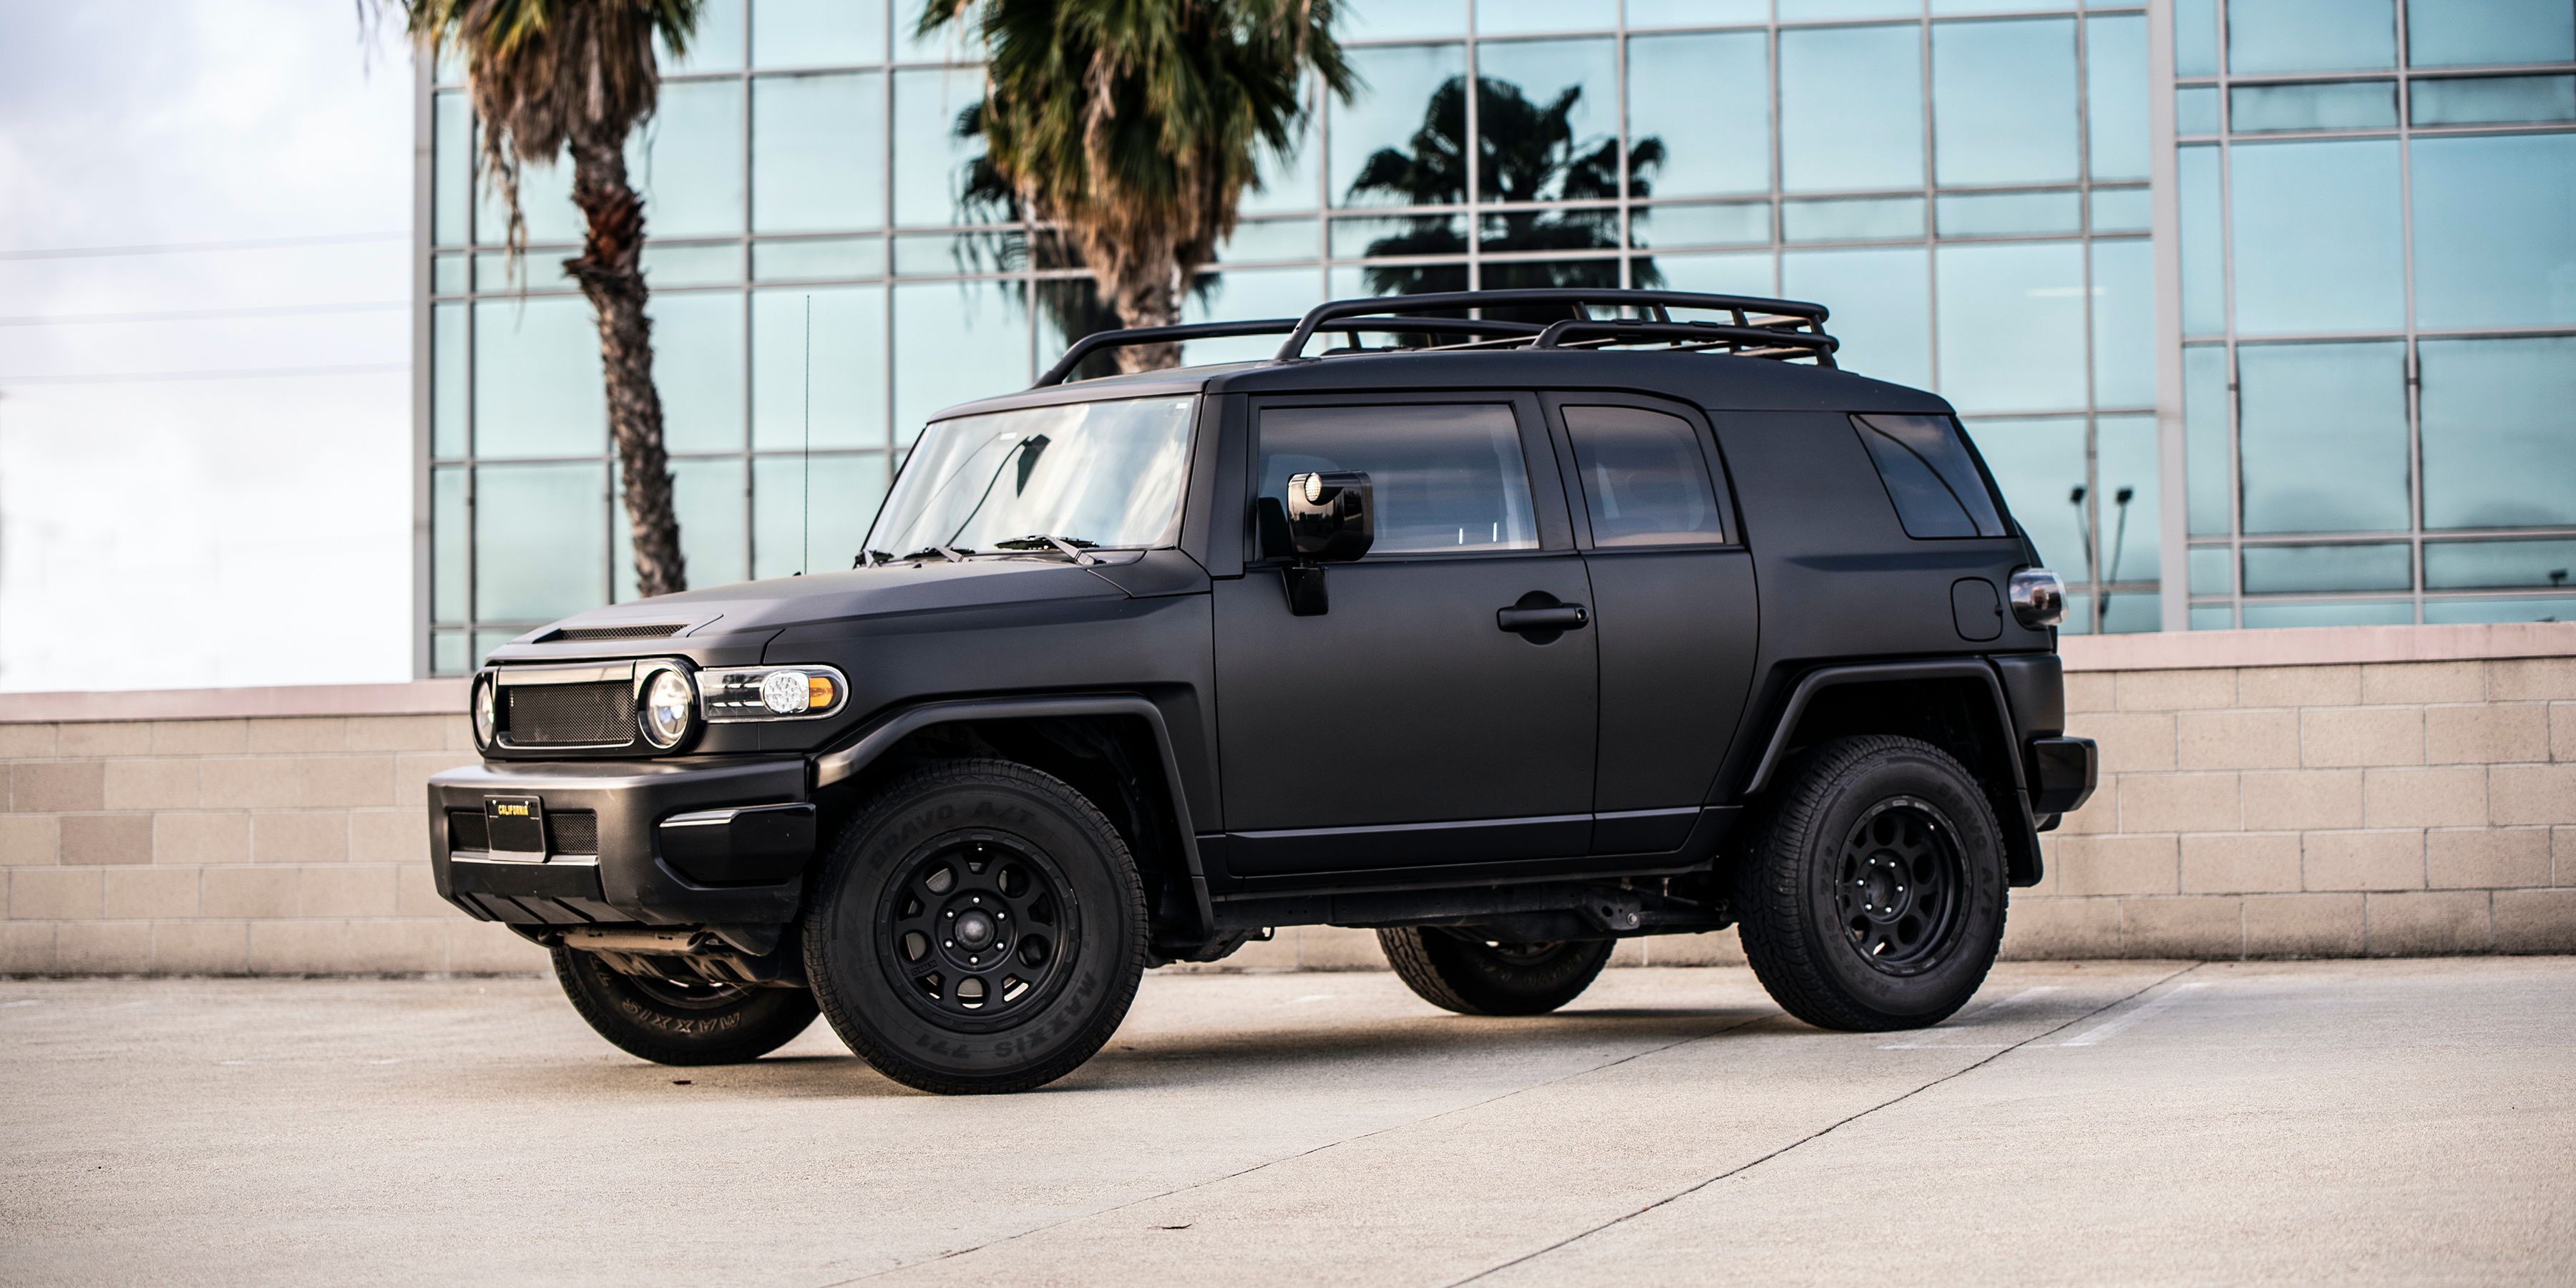 Black Toyota FJ Cruiser from side in front of glass building